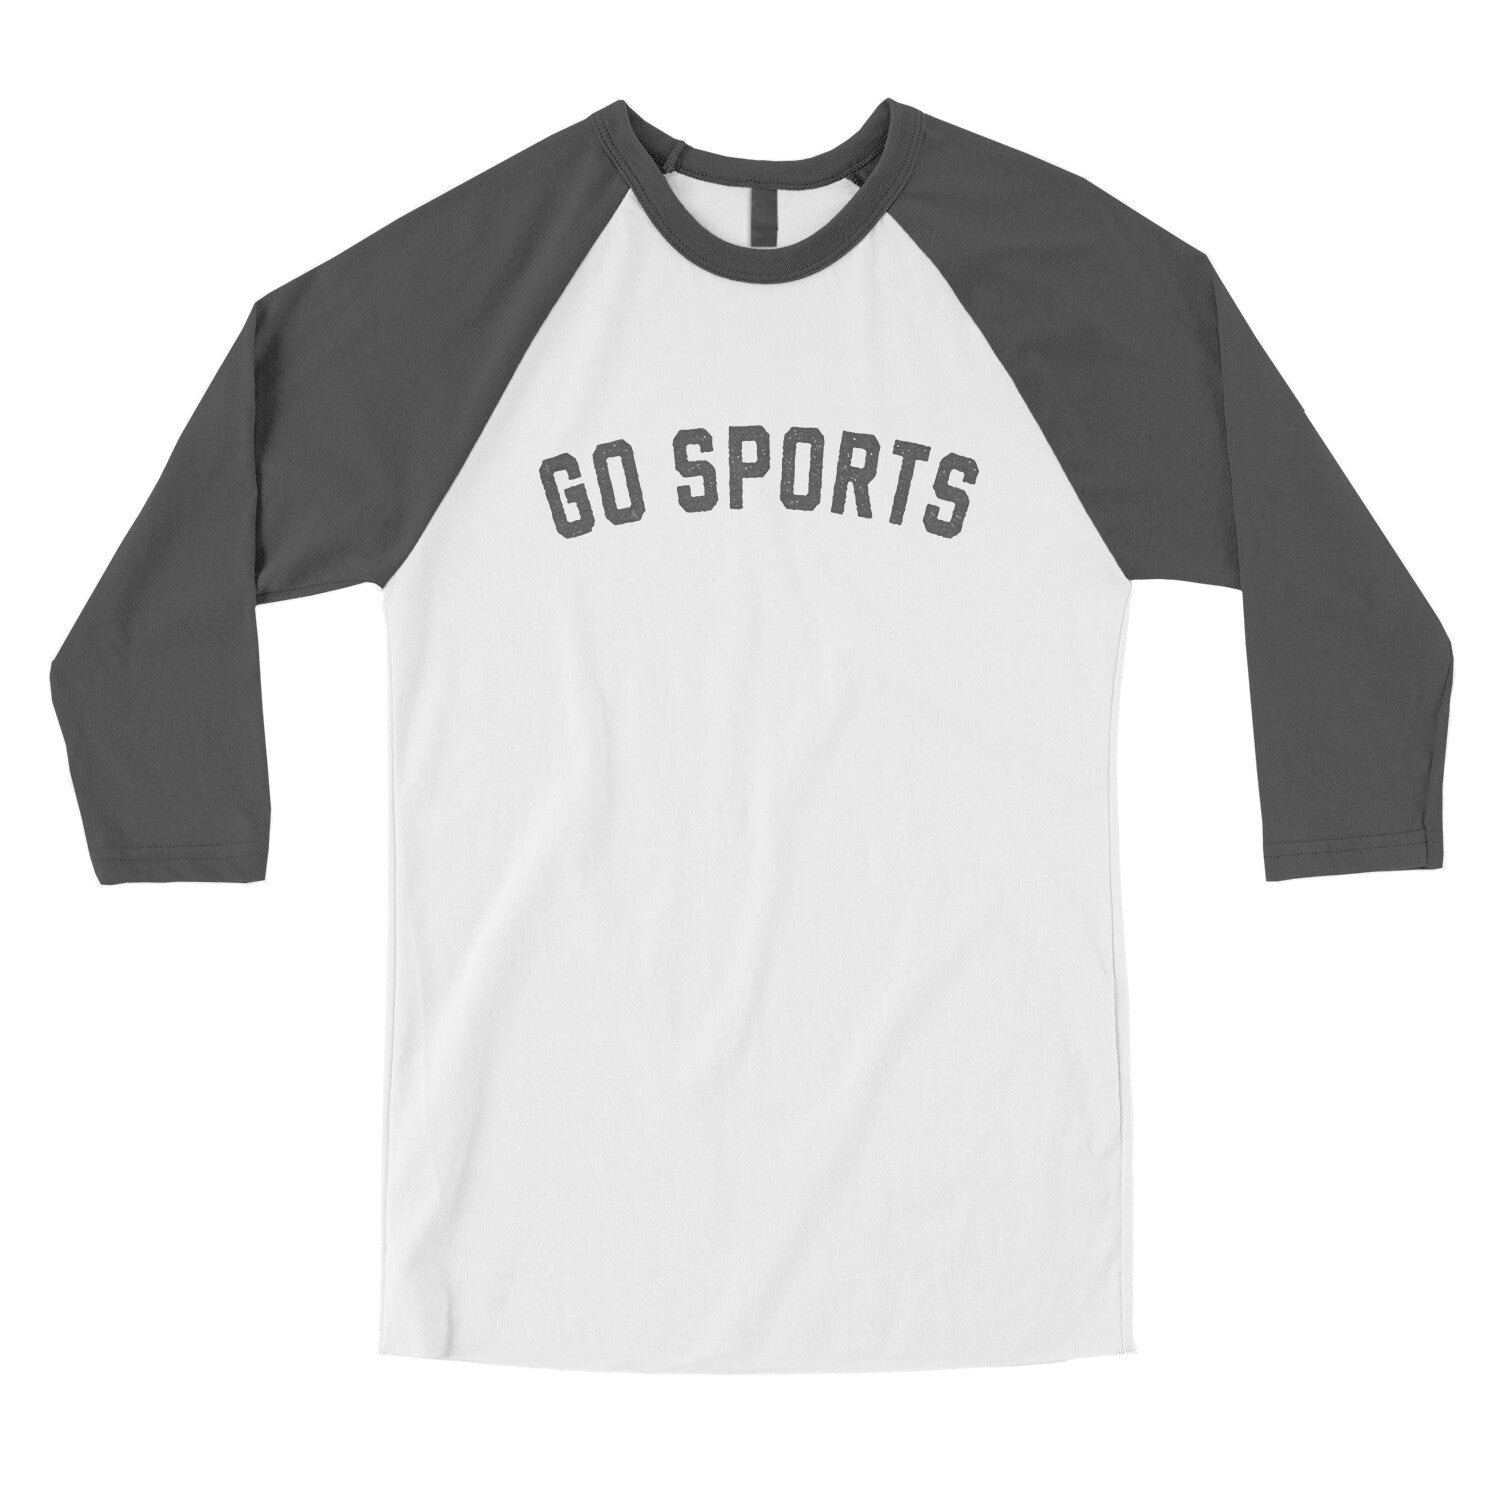 Go Sports in White with Asphalt Color